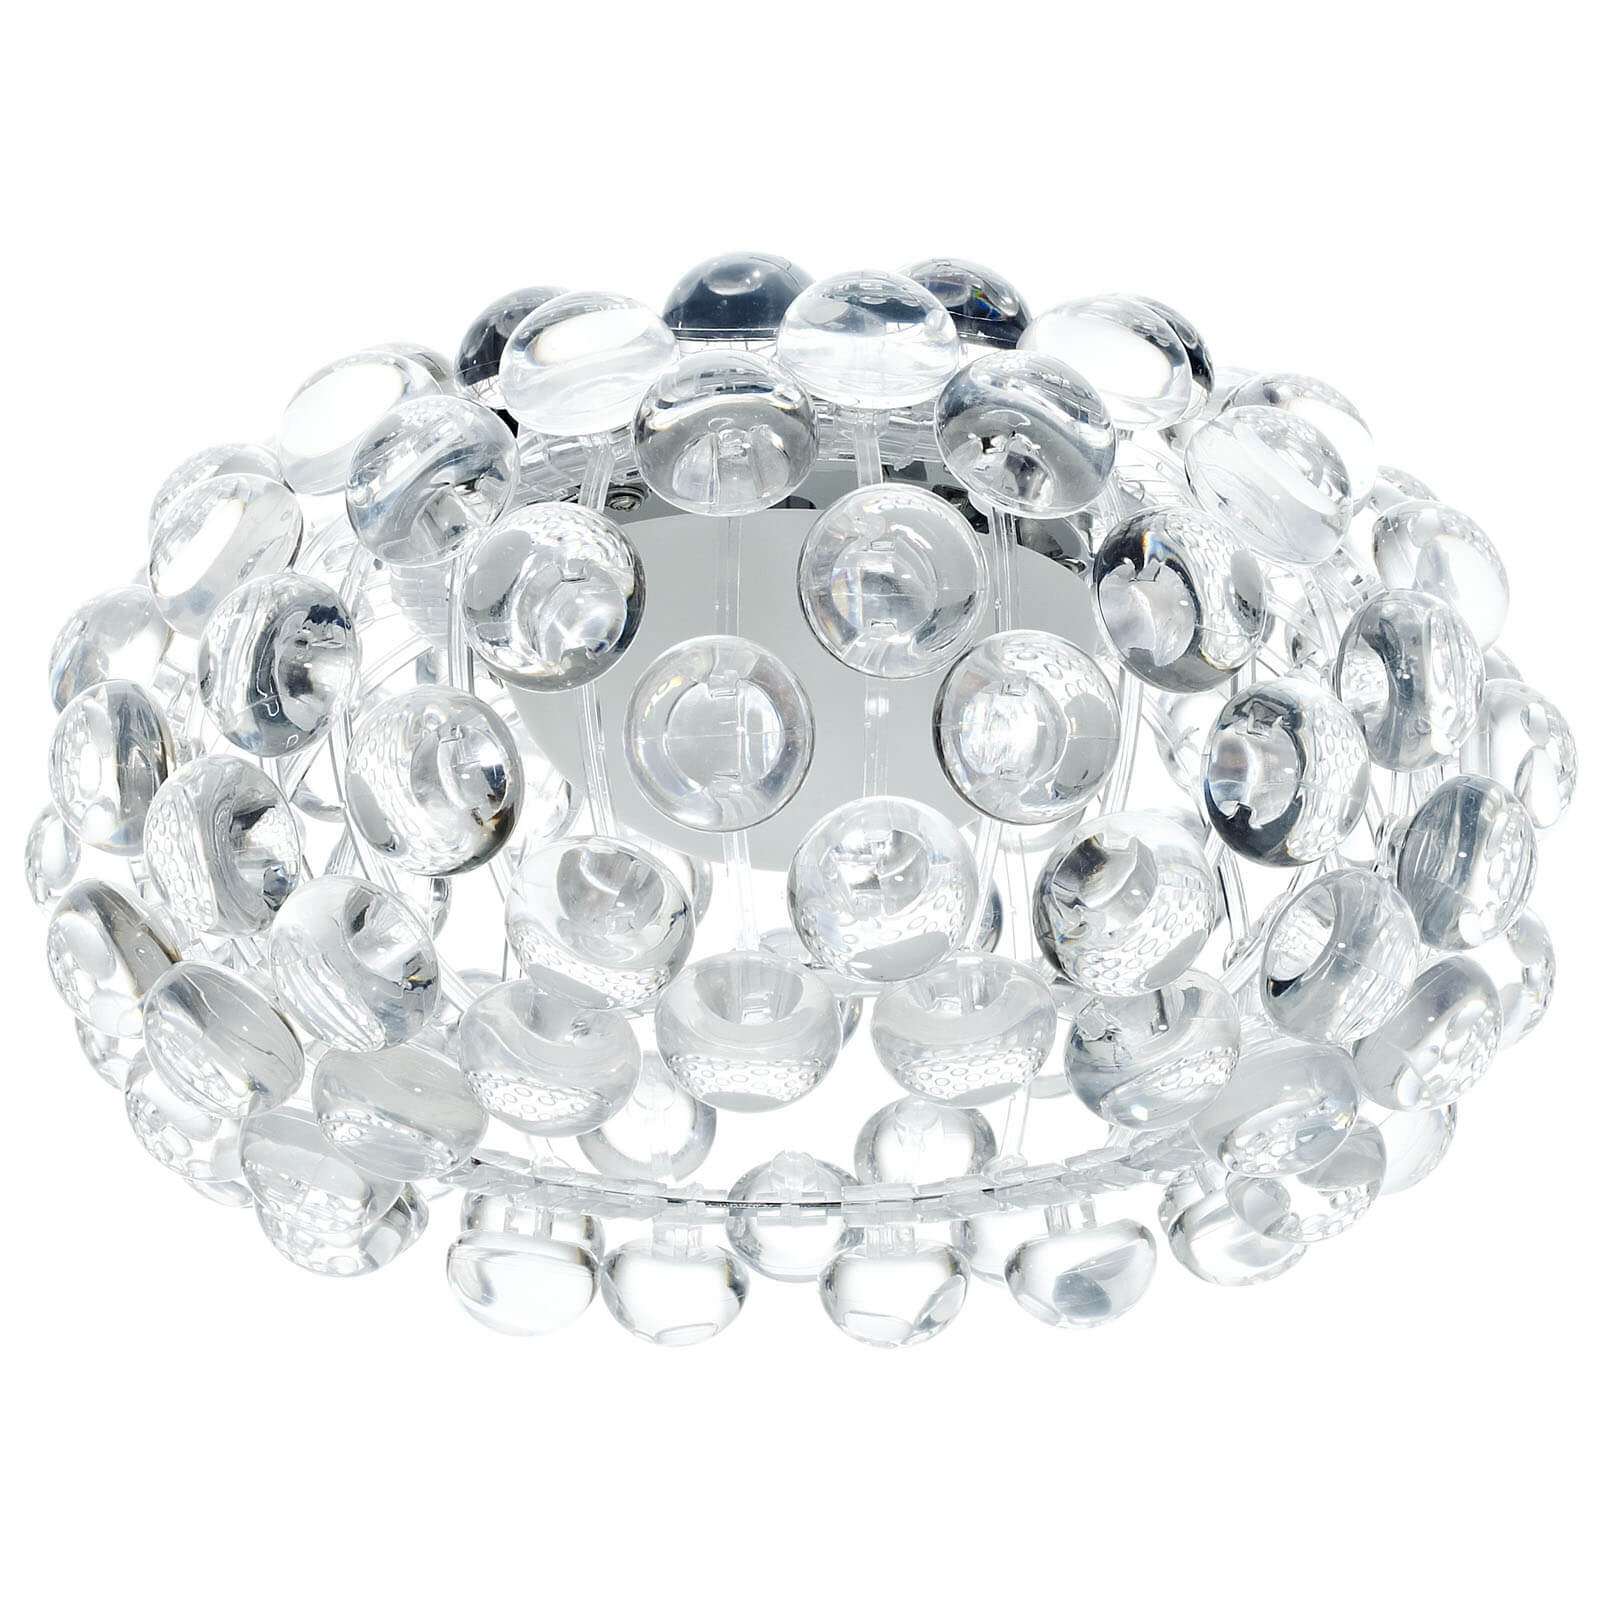 Suspended ceiling lights close view